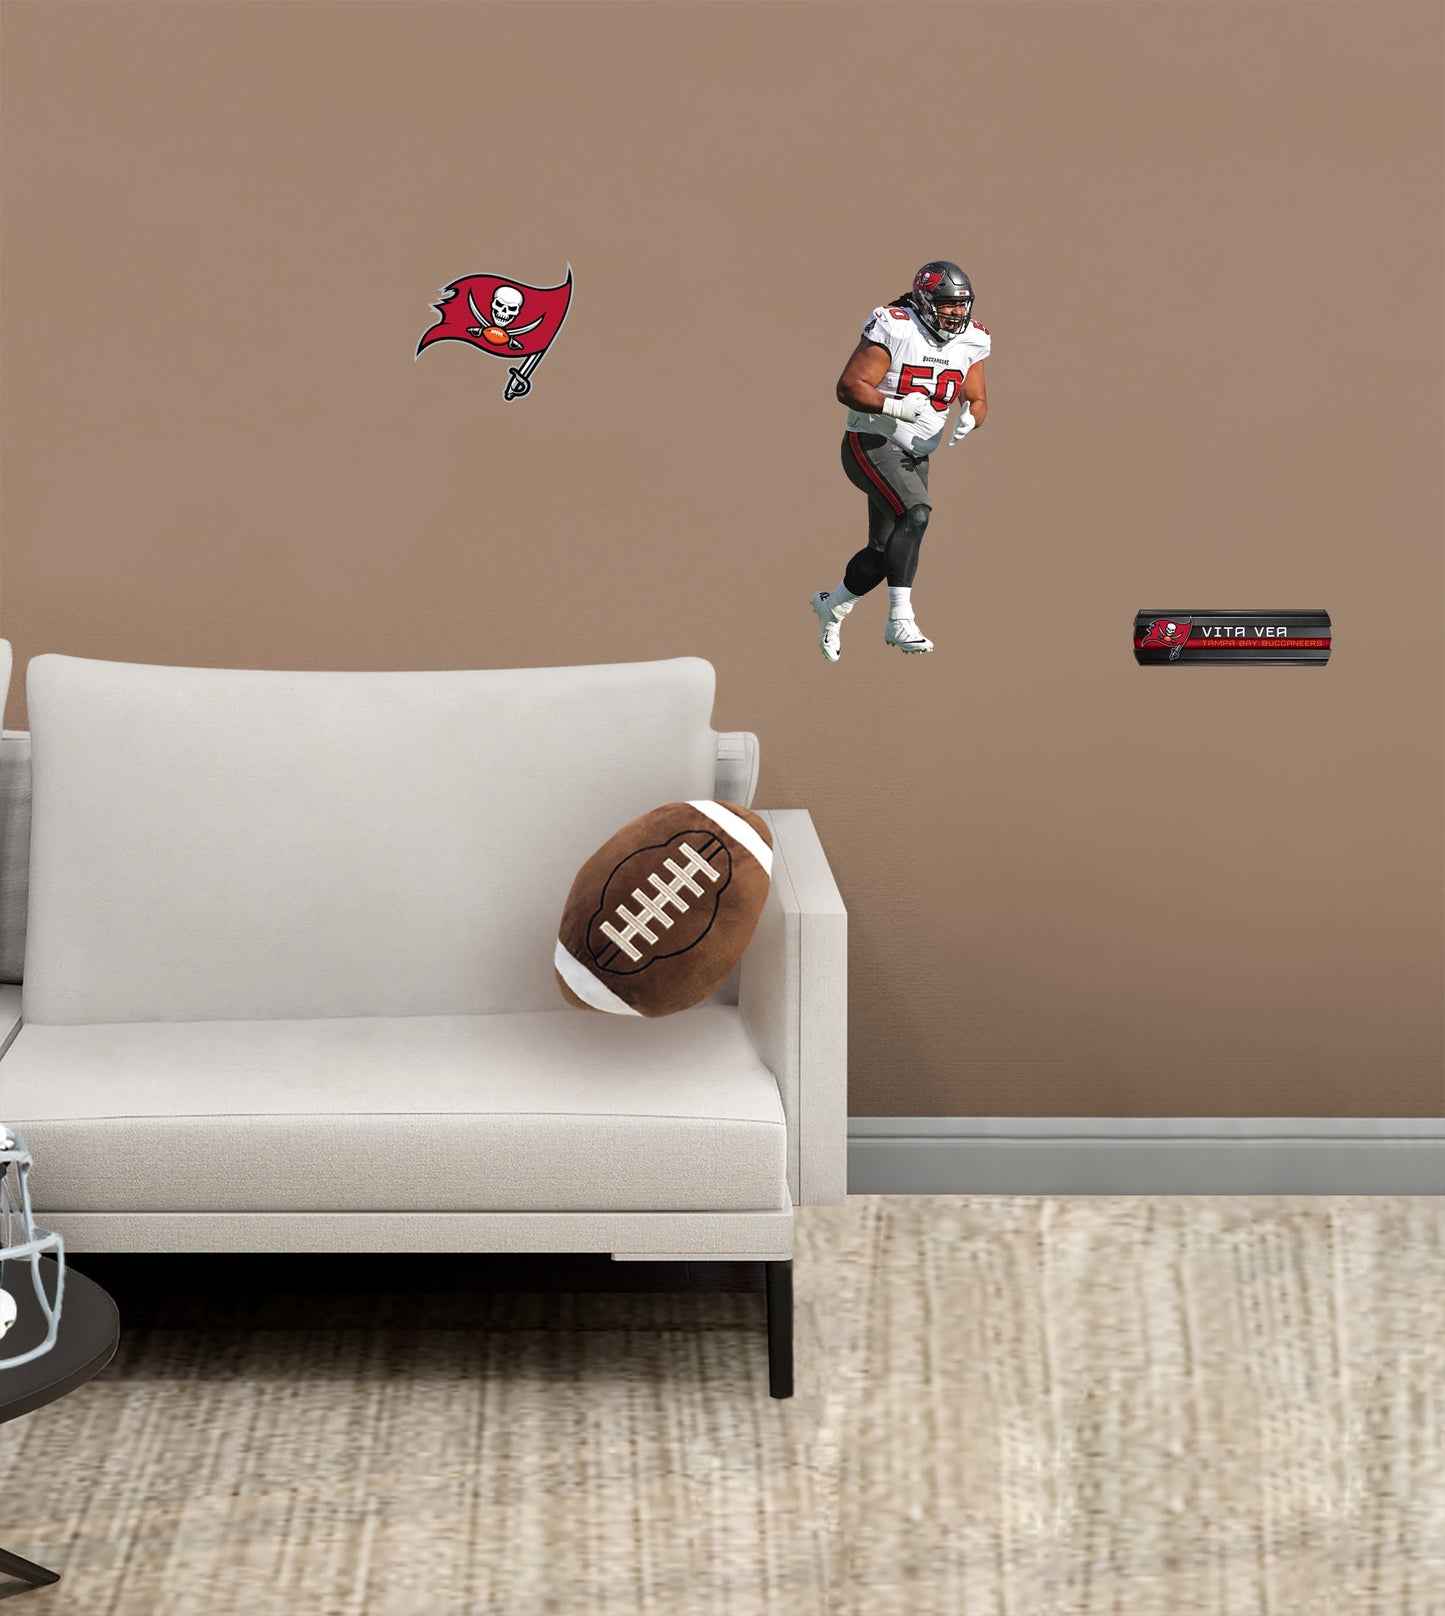 Tampa Bay Buccaneers: Vita Vea - Officially Licensed NFL Removable Adhesive Decal